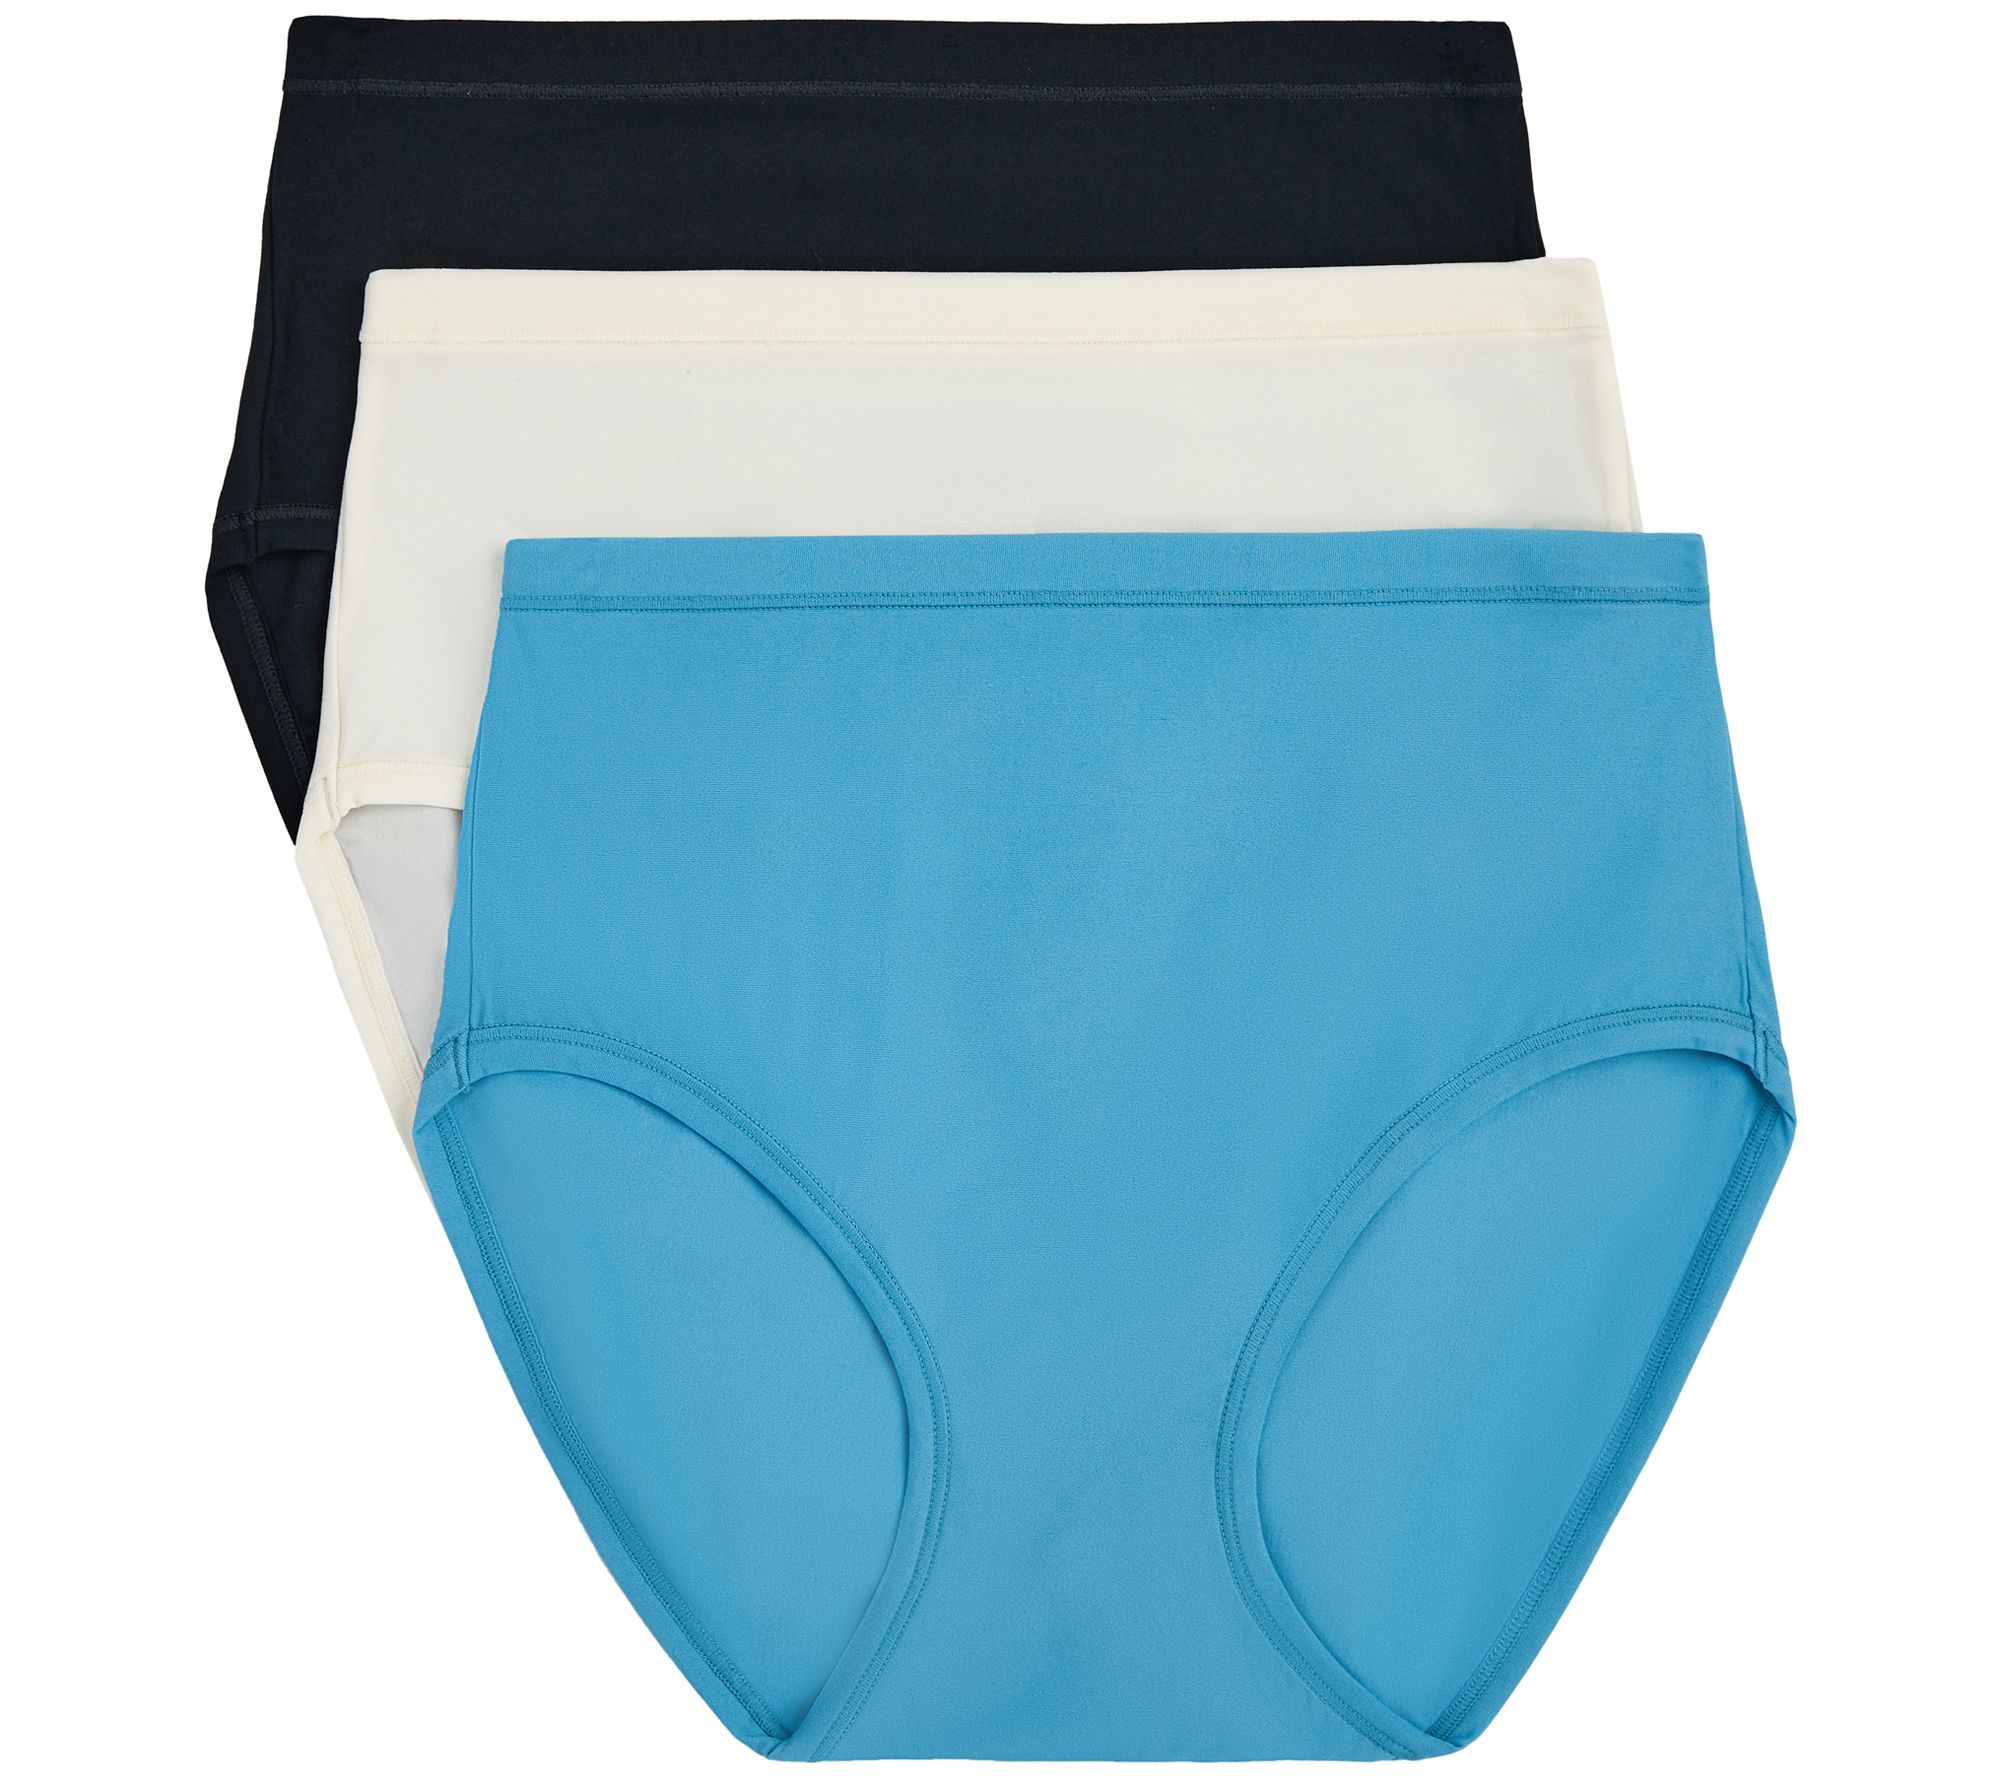 Hanes® Women's Get Cozy Panties HIPSTERS 3-Pack Breathable